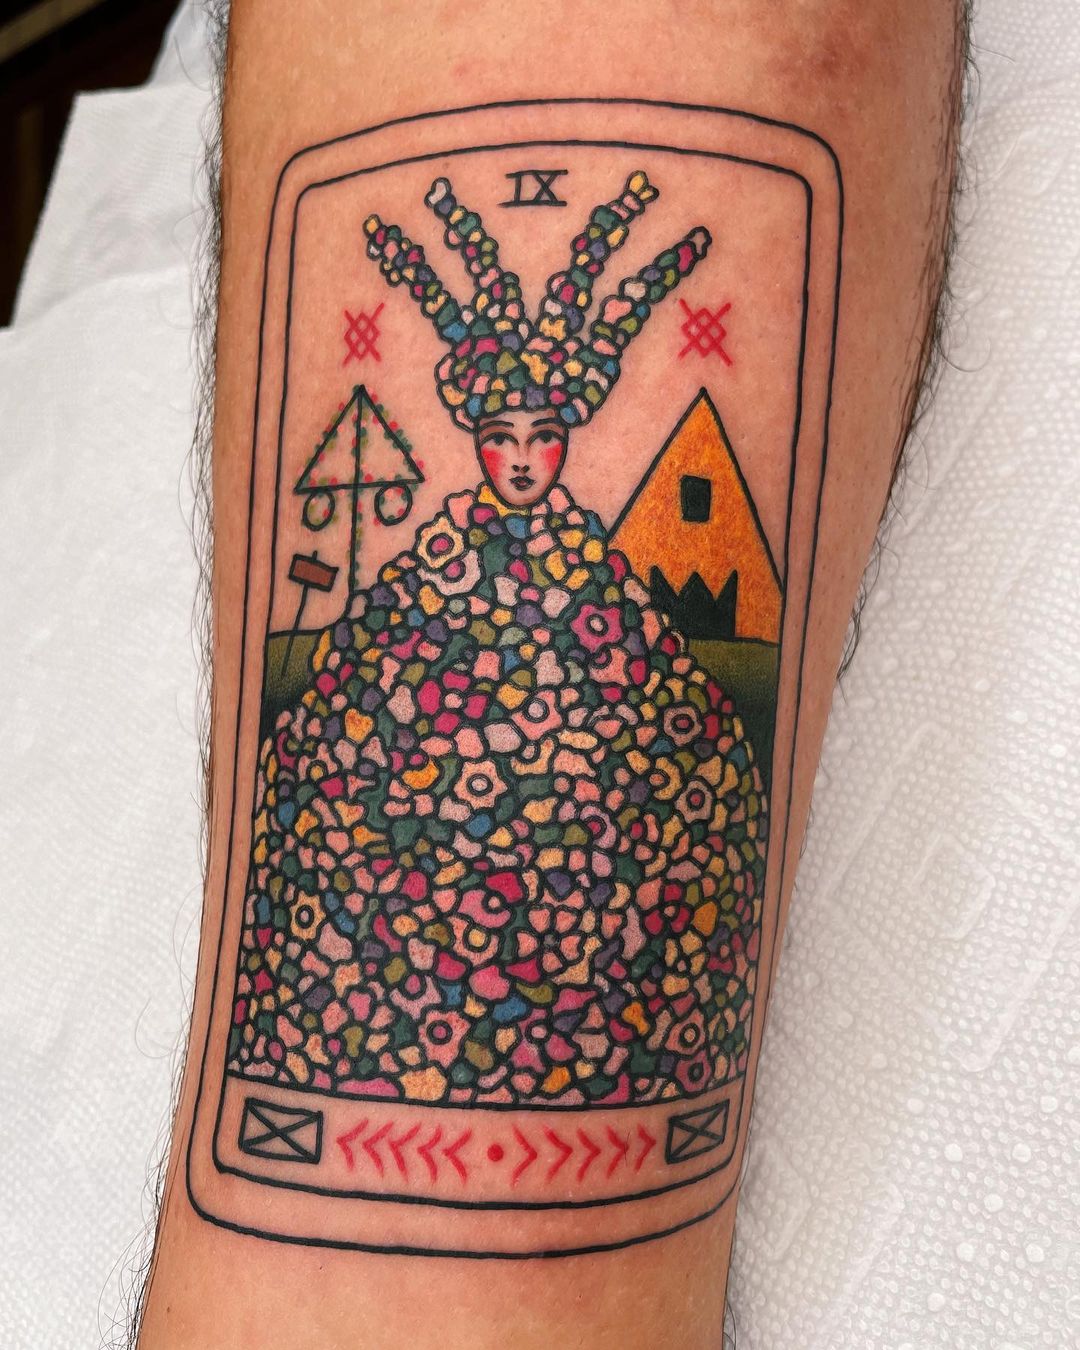 Battle Royale Tattoos: – All Things Tattoo